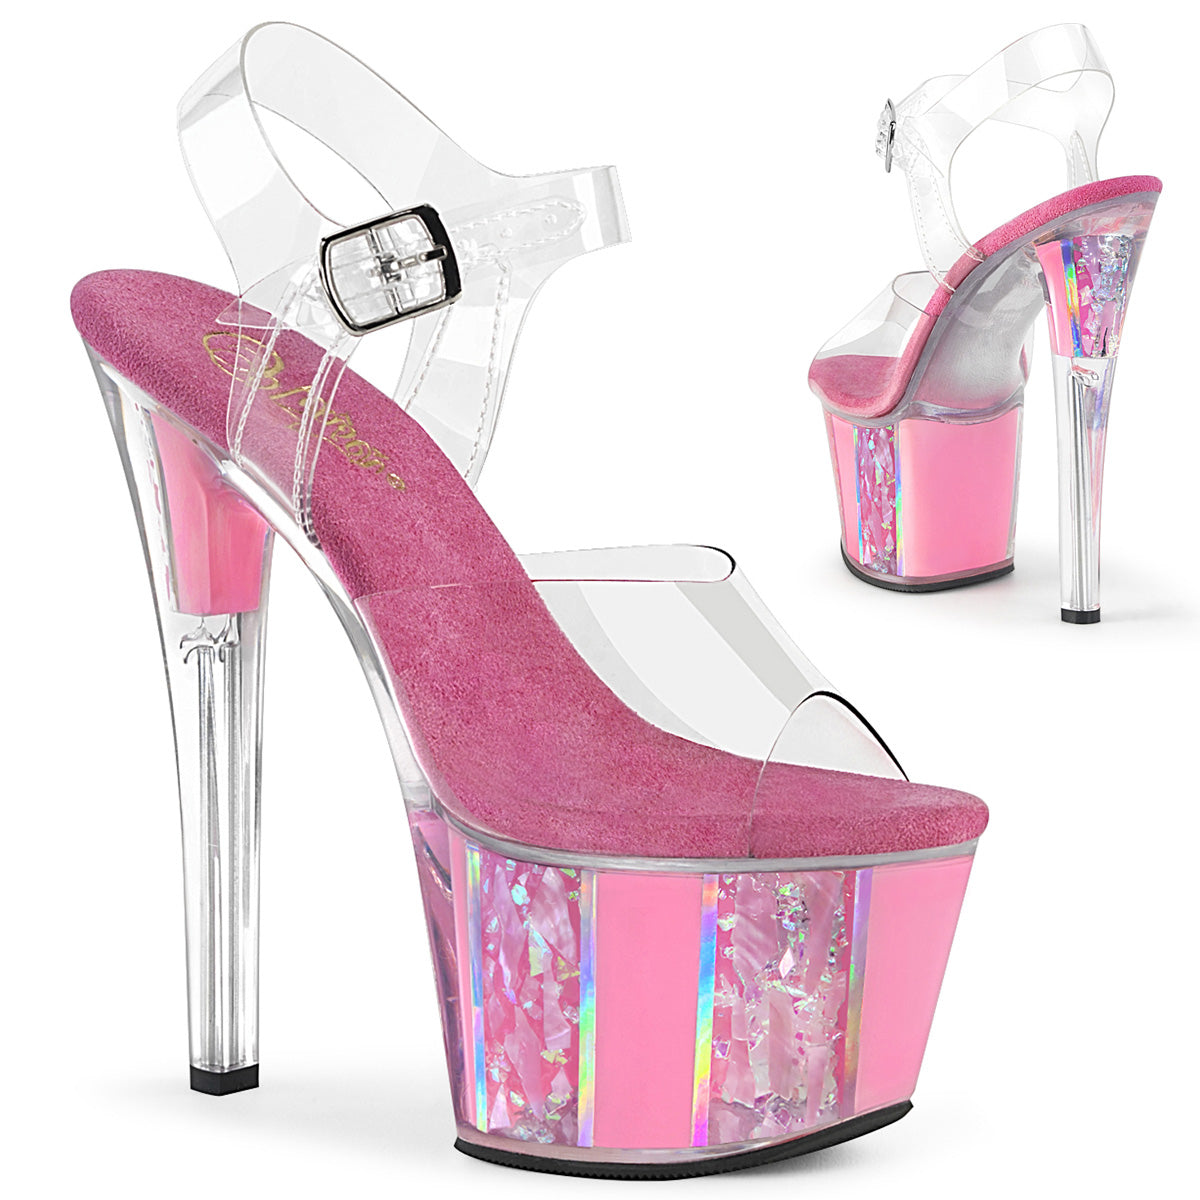 SKY-308OF 7" Heel Clear and Baby Pink Pole Dancing Platforms-Pleaser- Sexy Shoes